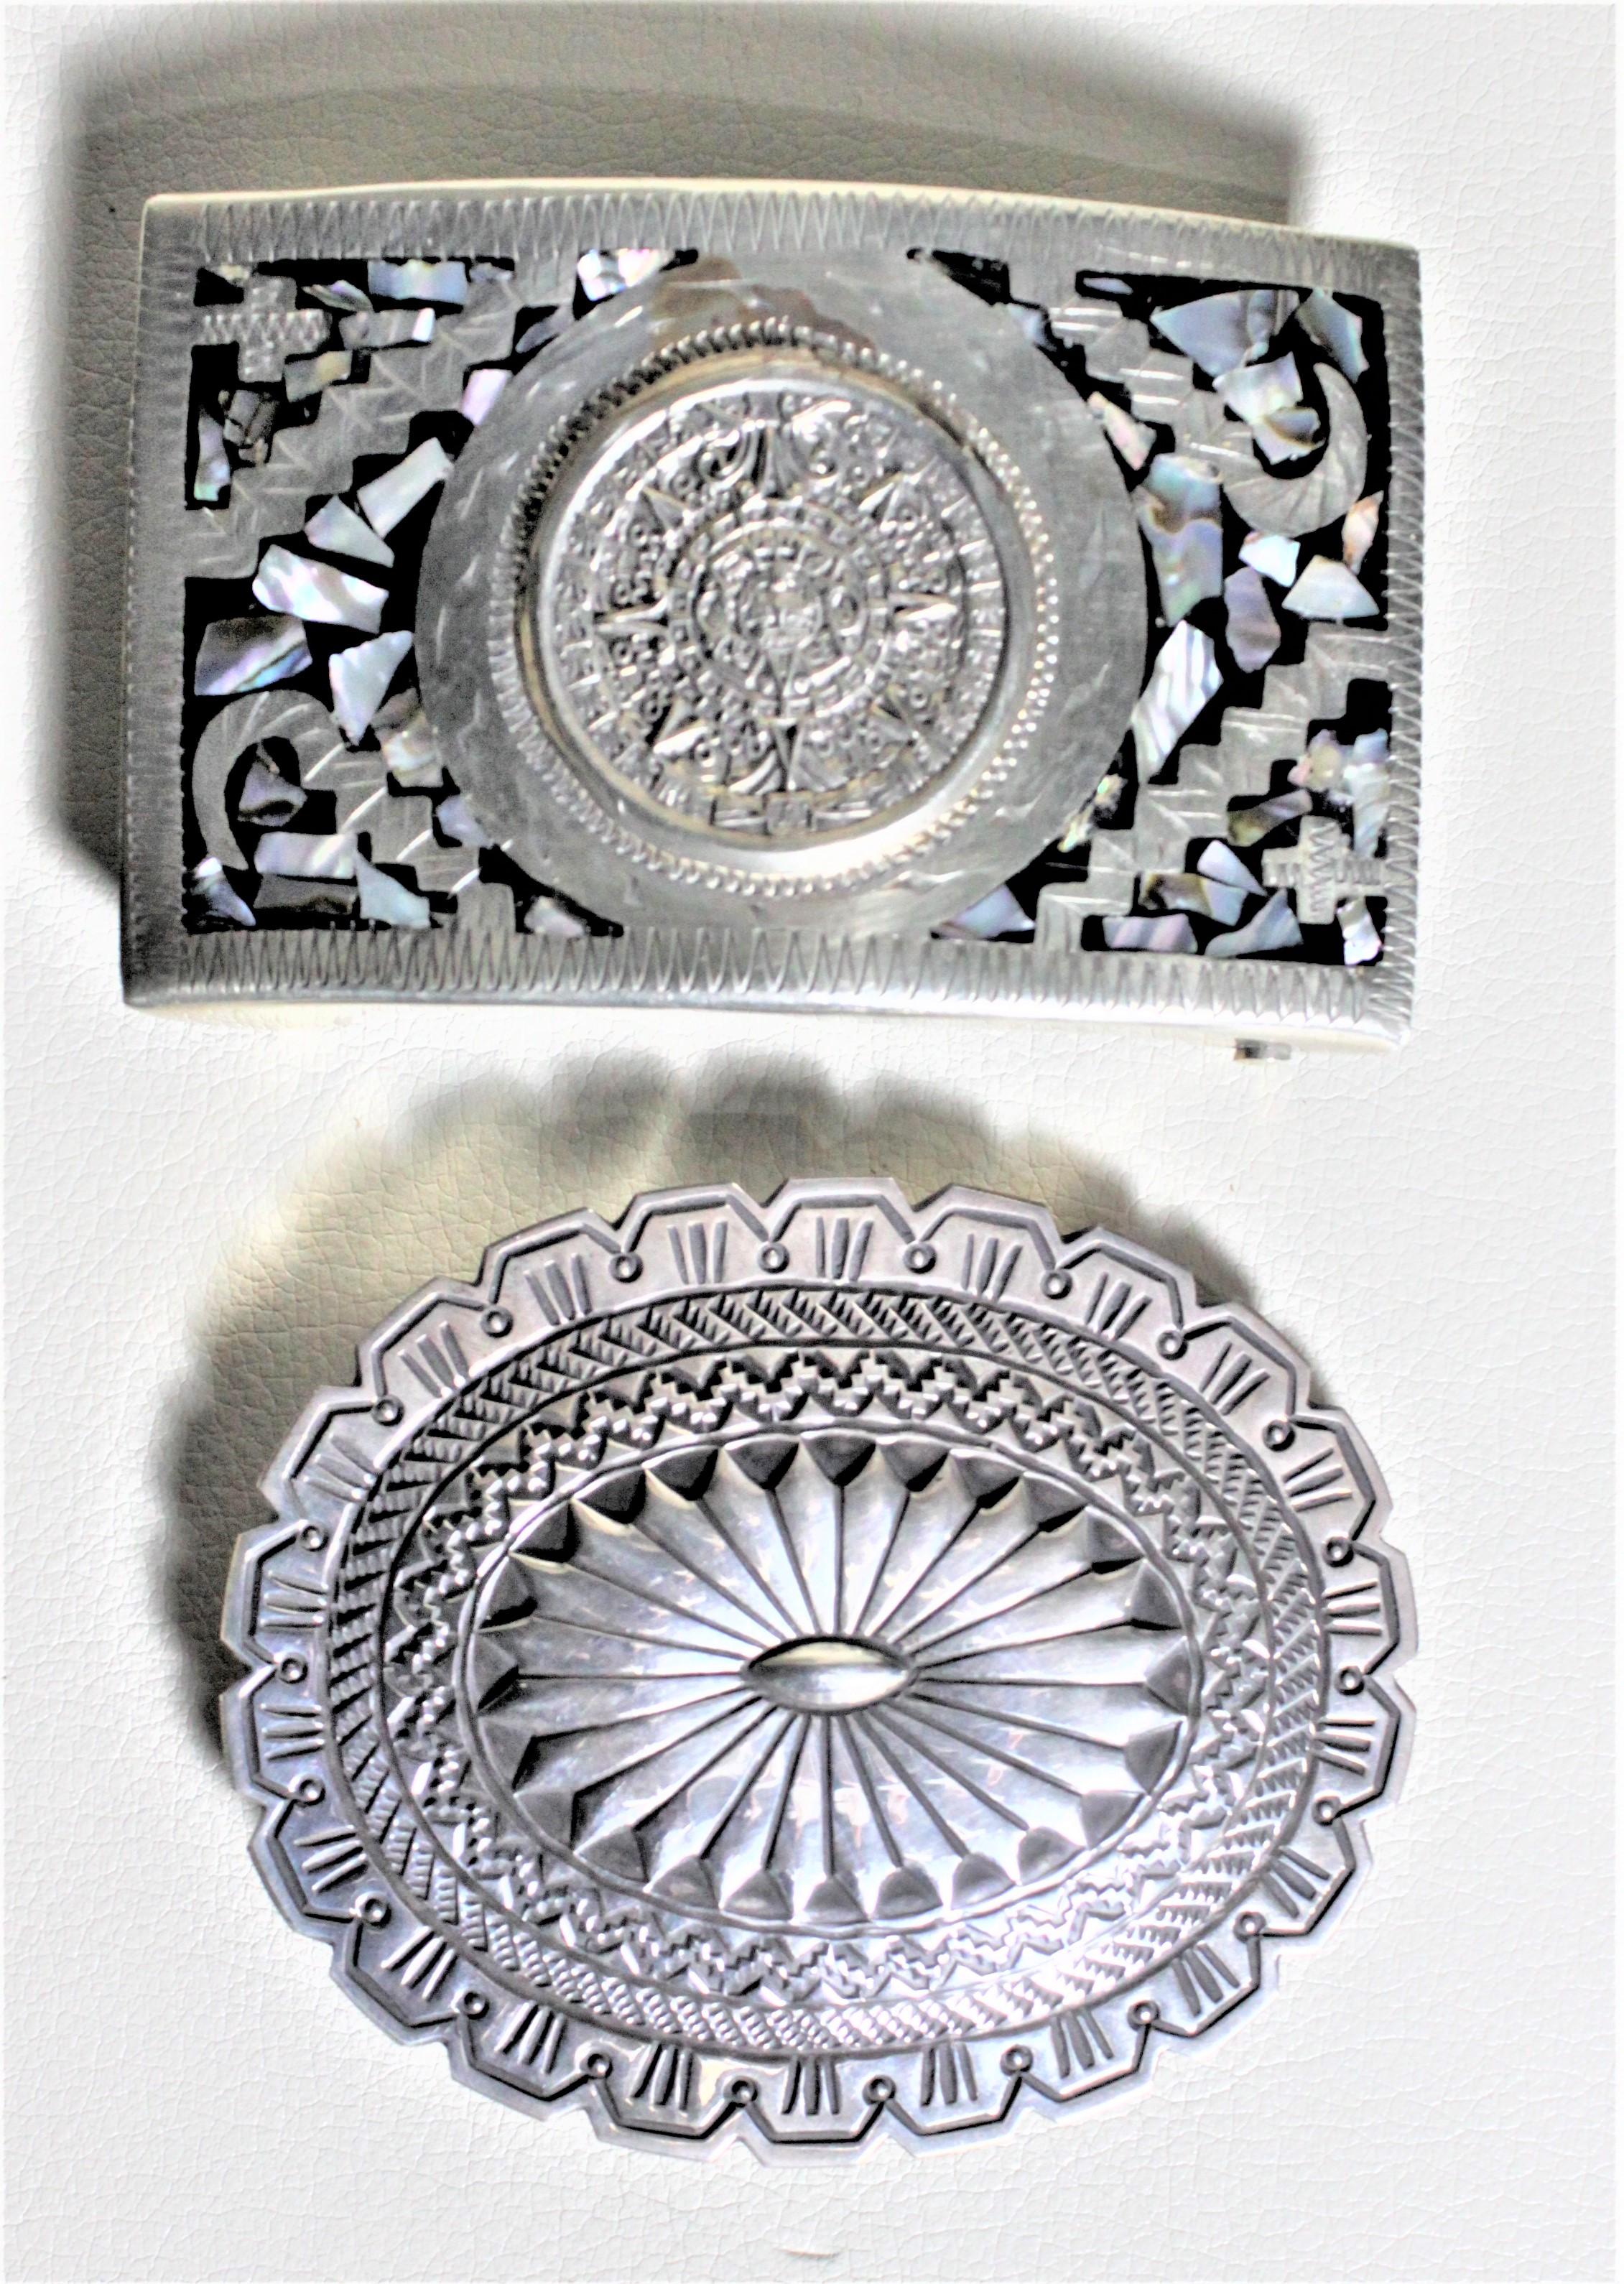 This pair of midcentury silver and turquoise belt buckles are presumed to have been made in circa 1965. The buckle with the round central medallion and inlaid with mother of pearl is believed to be Mexican. The oval shaped buckle is artist signed by